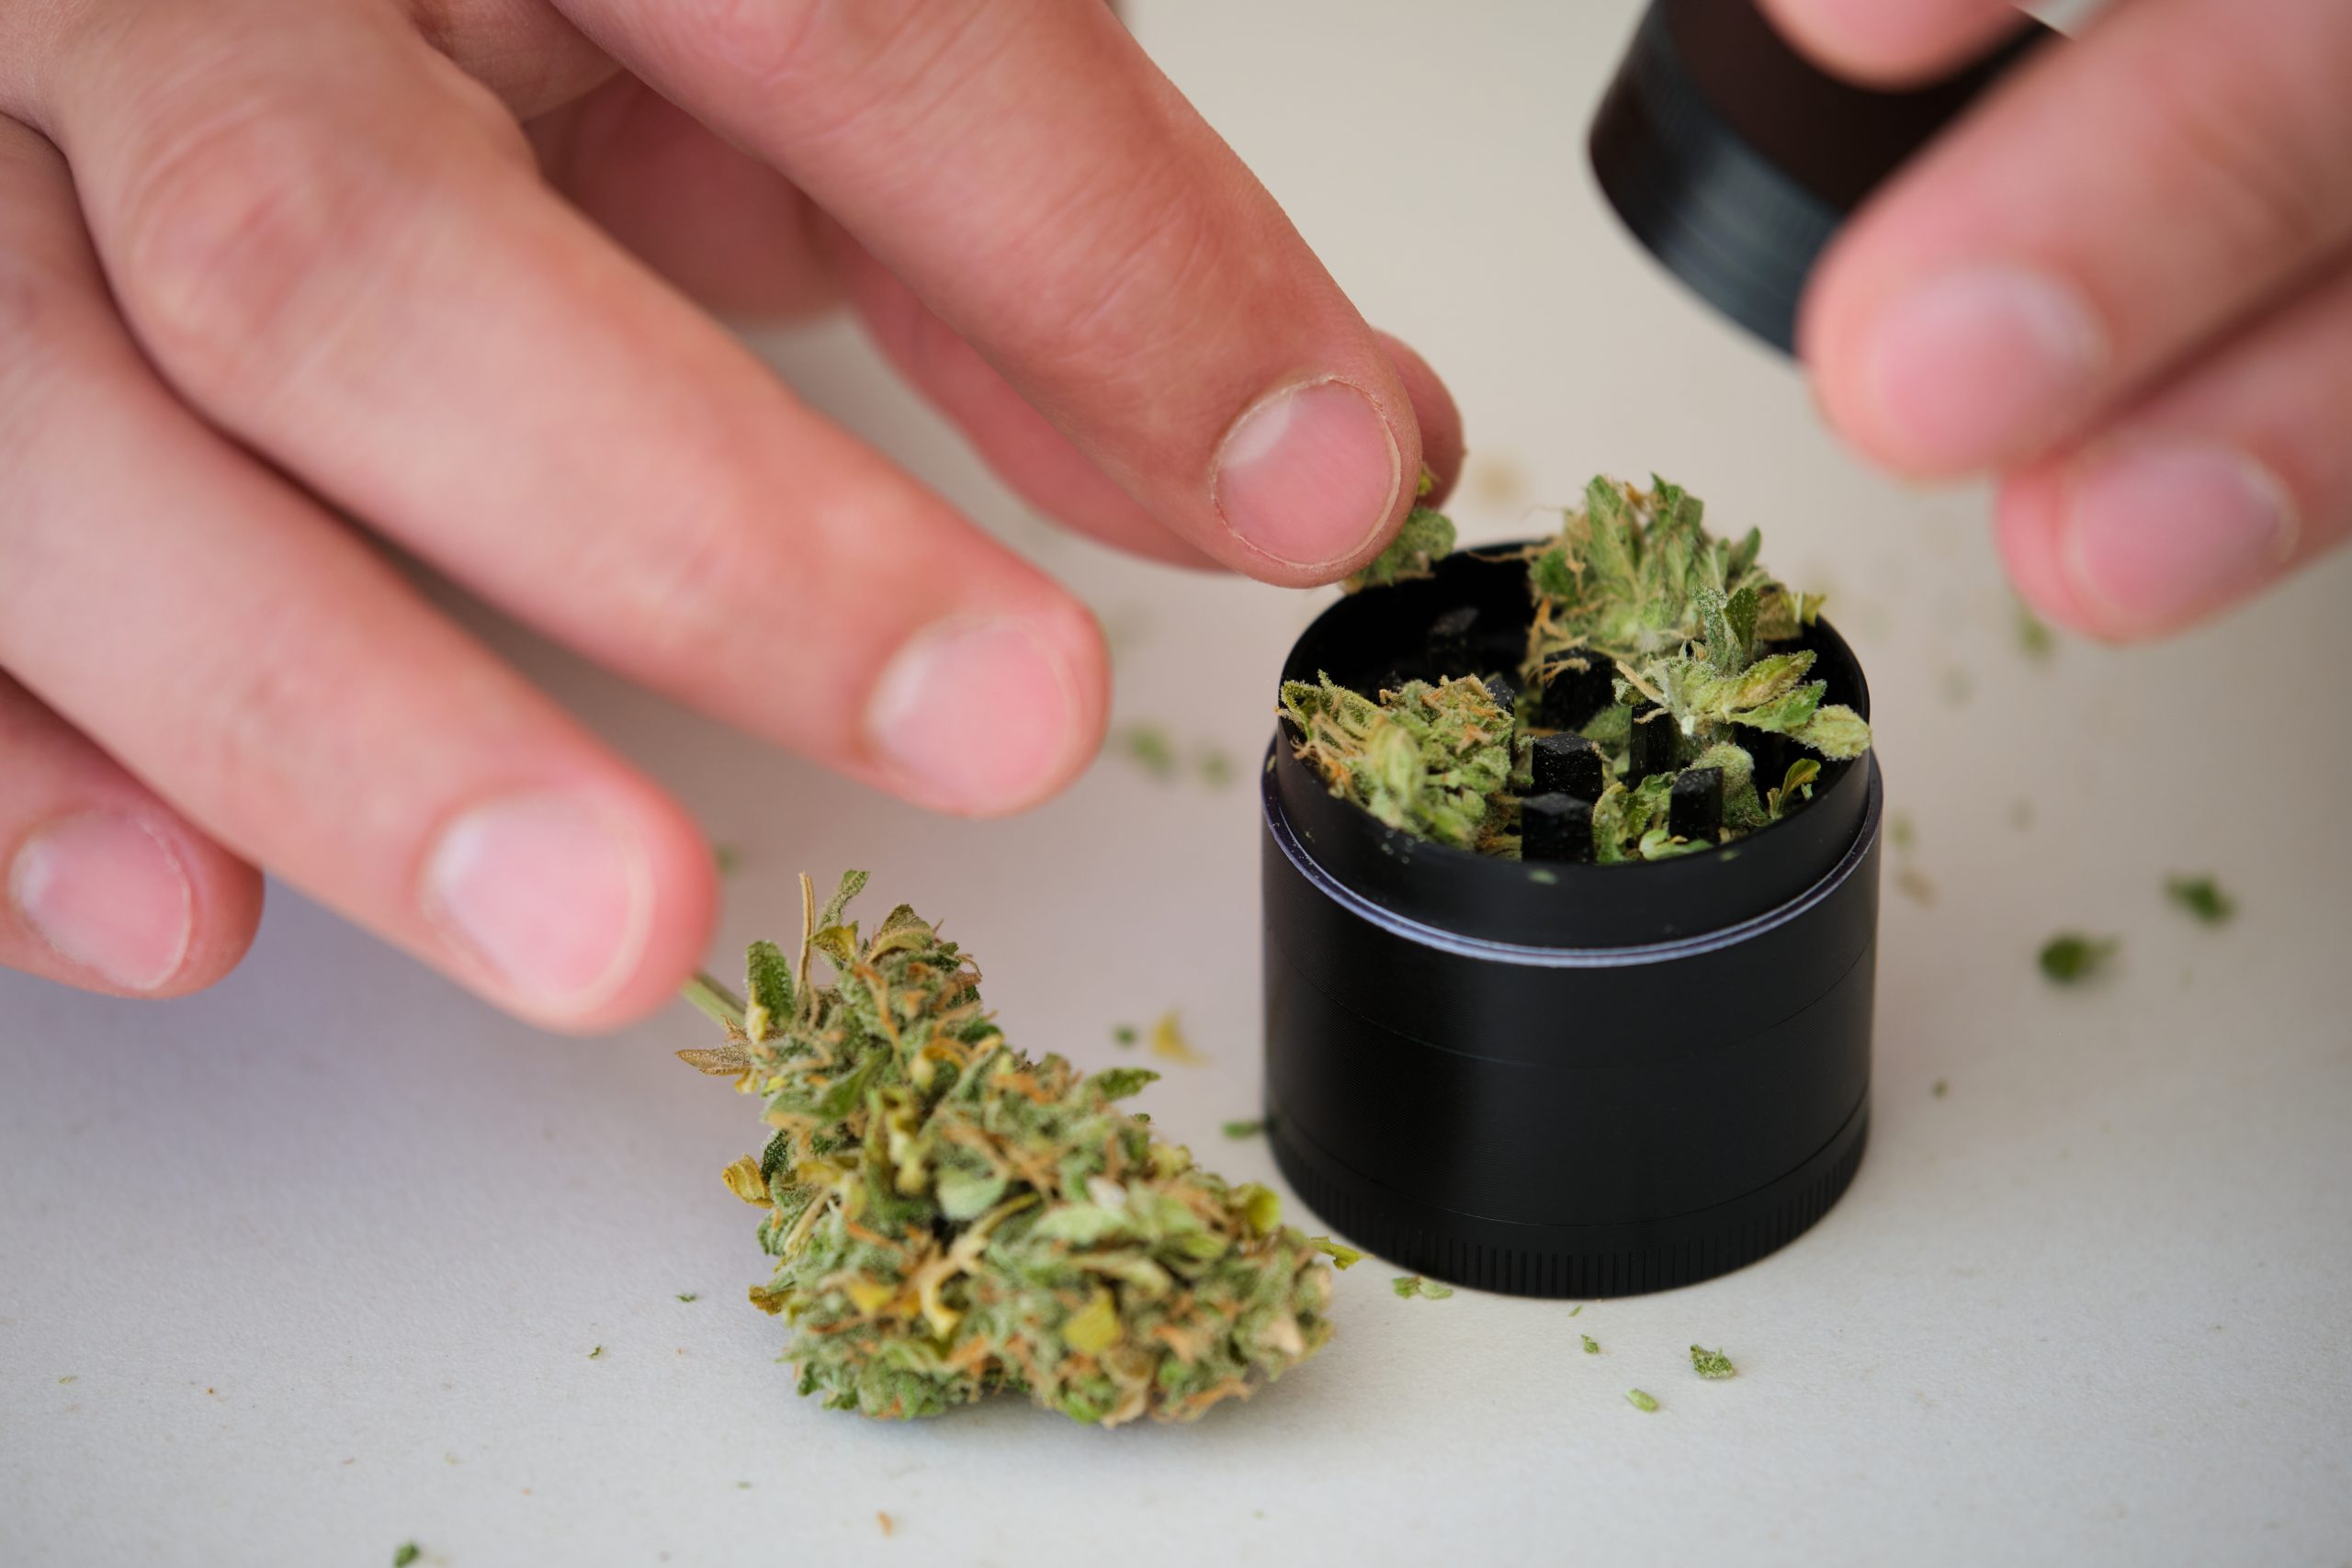 How to Grind Weed With or Without a Grinder - The Heritage Club